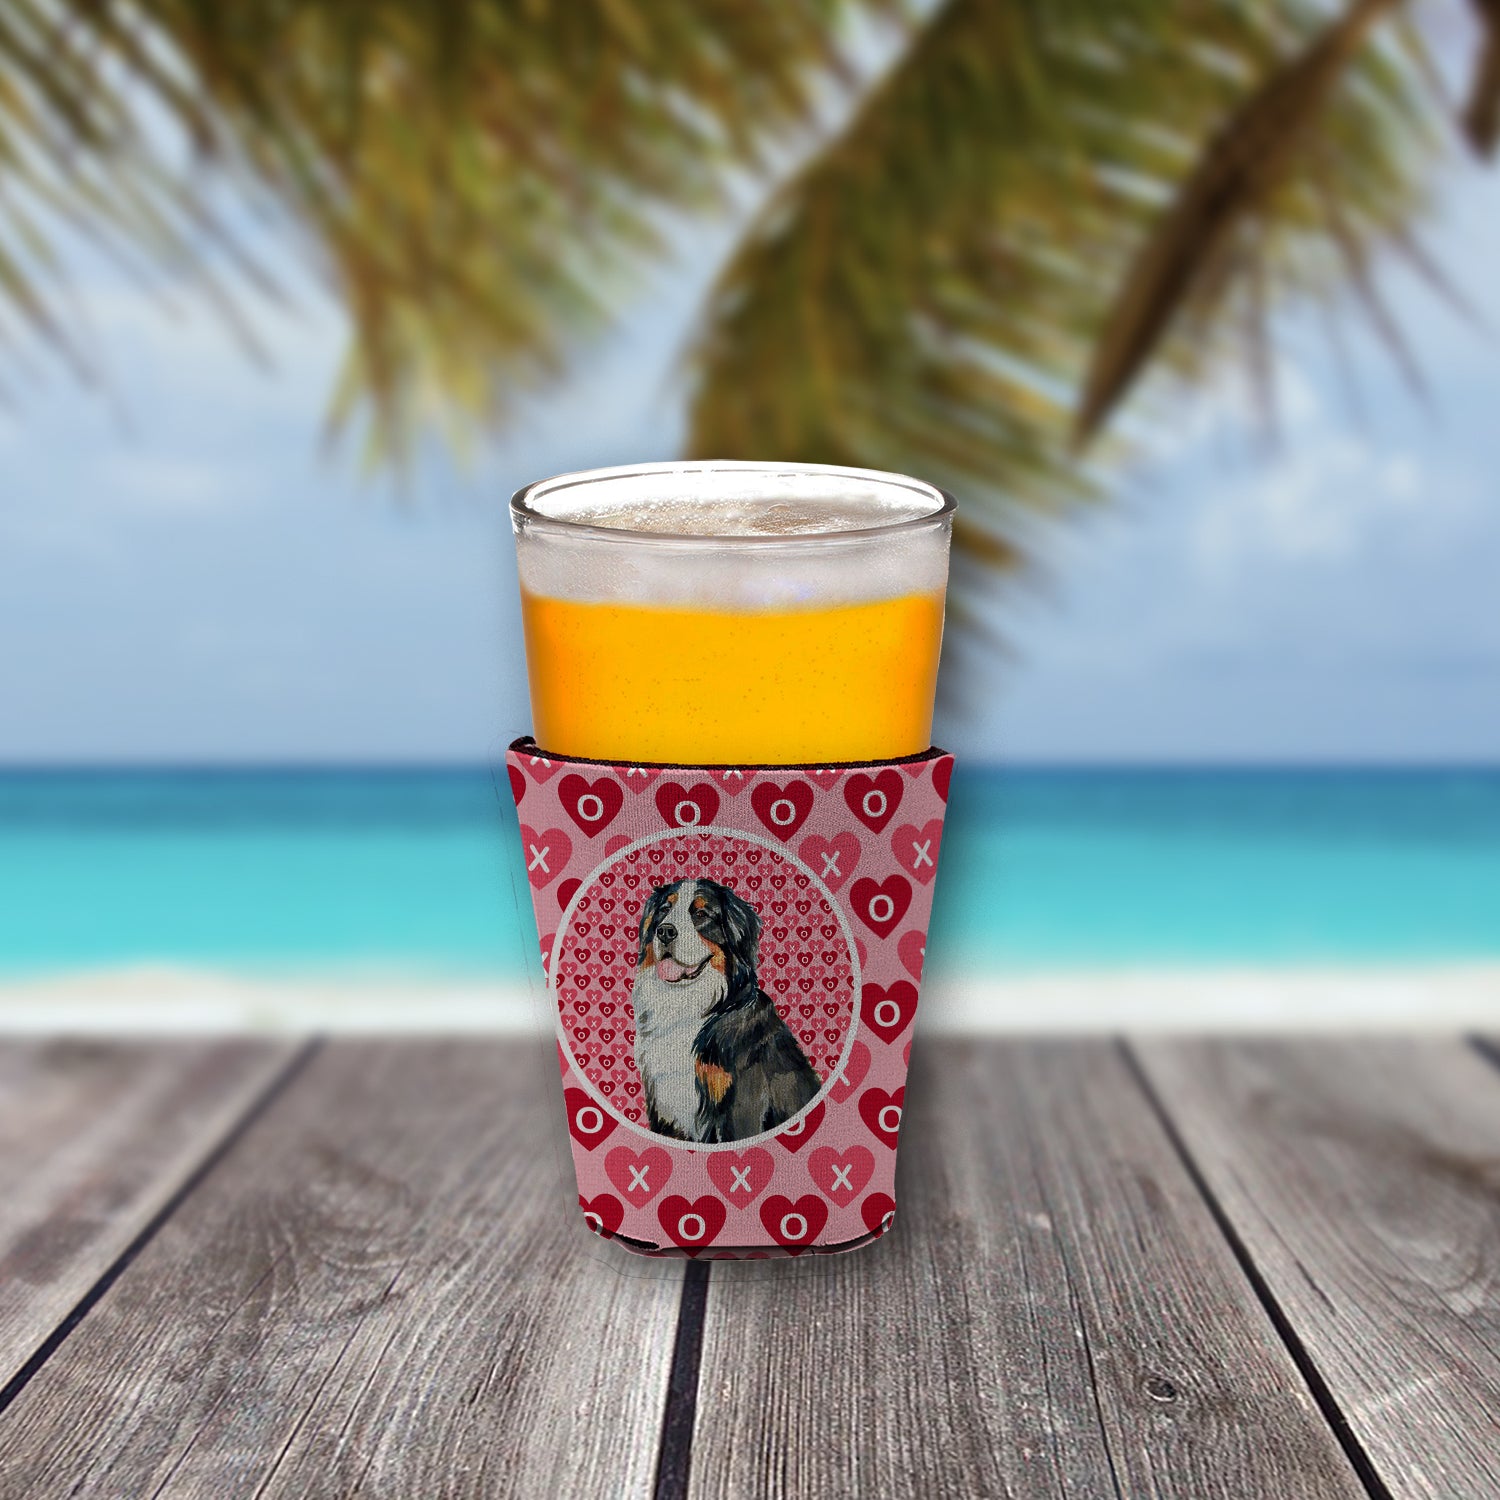 Bernese Mountain Dog Valentine's Love and Hearts Red Cup Beverage Insulator Hugger  the-store.com.